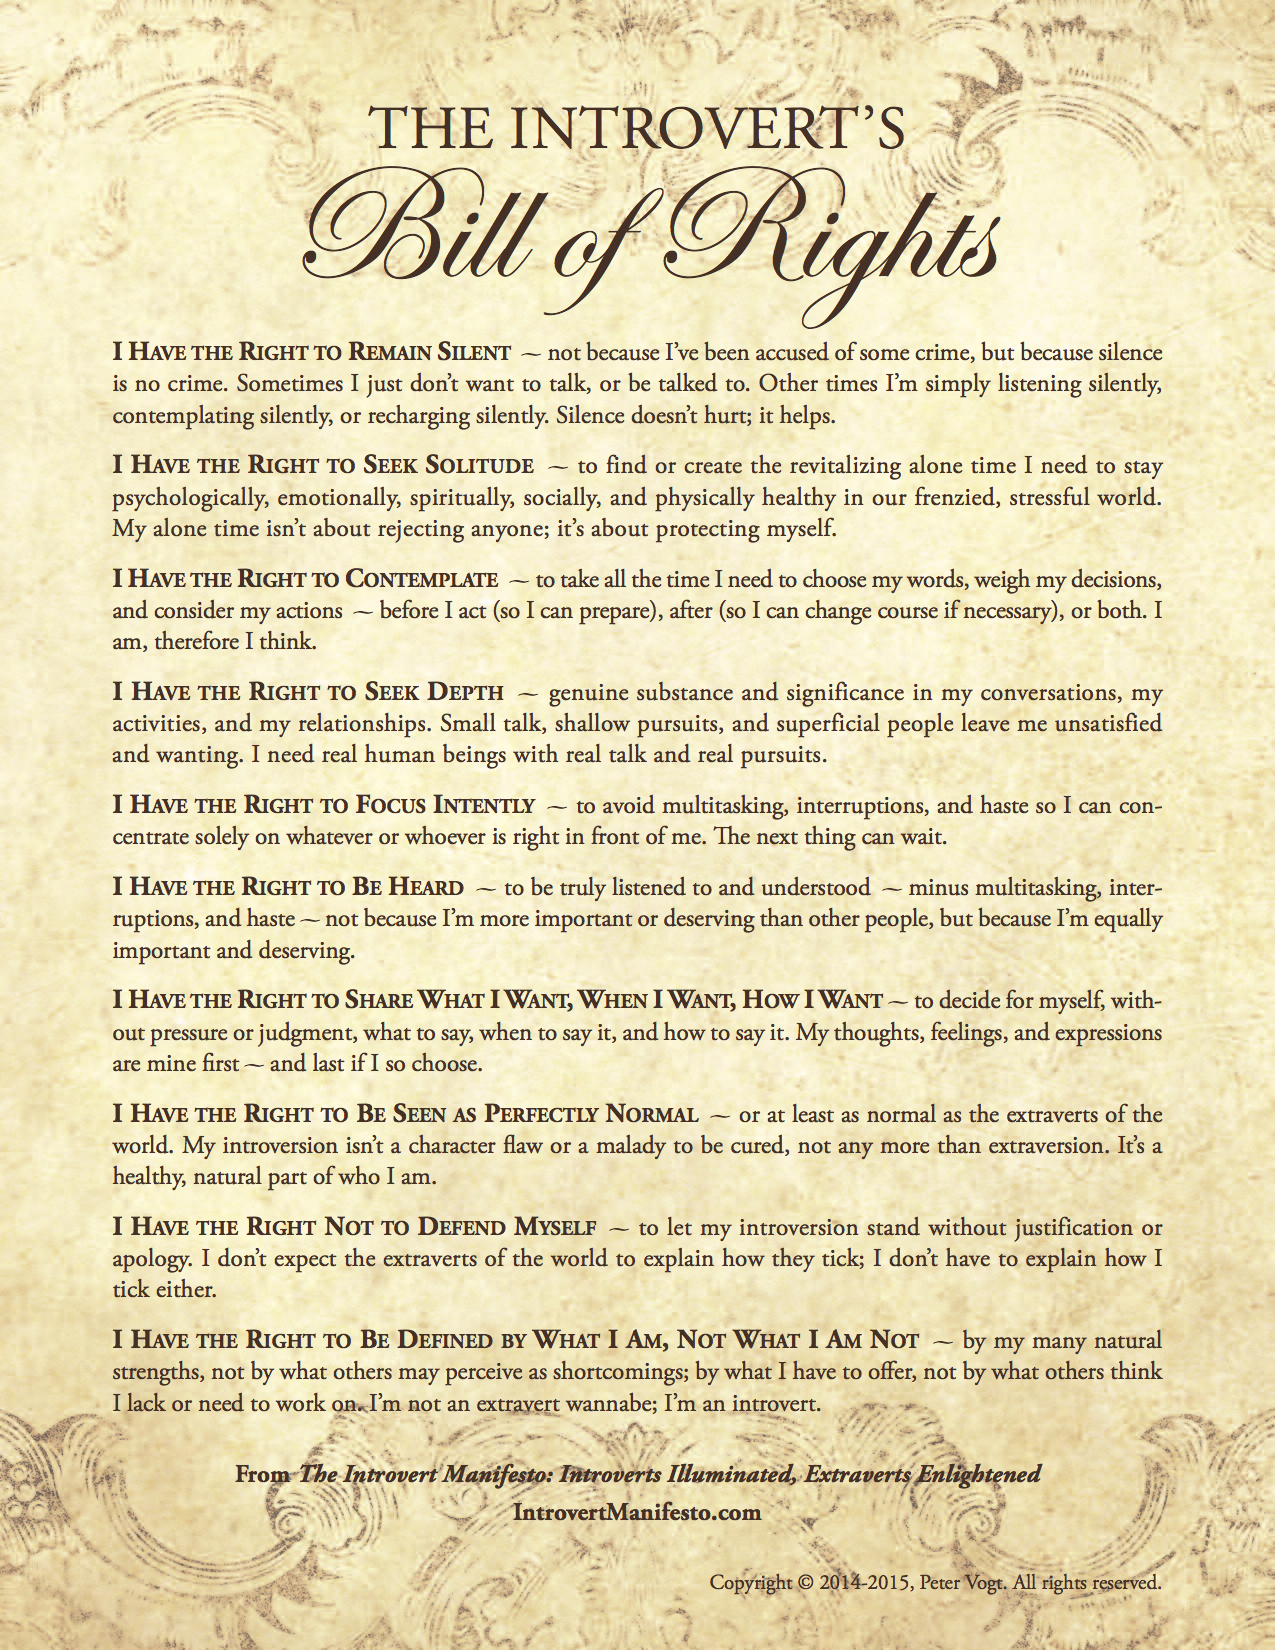 The Introvert's Bill of Rights